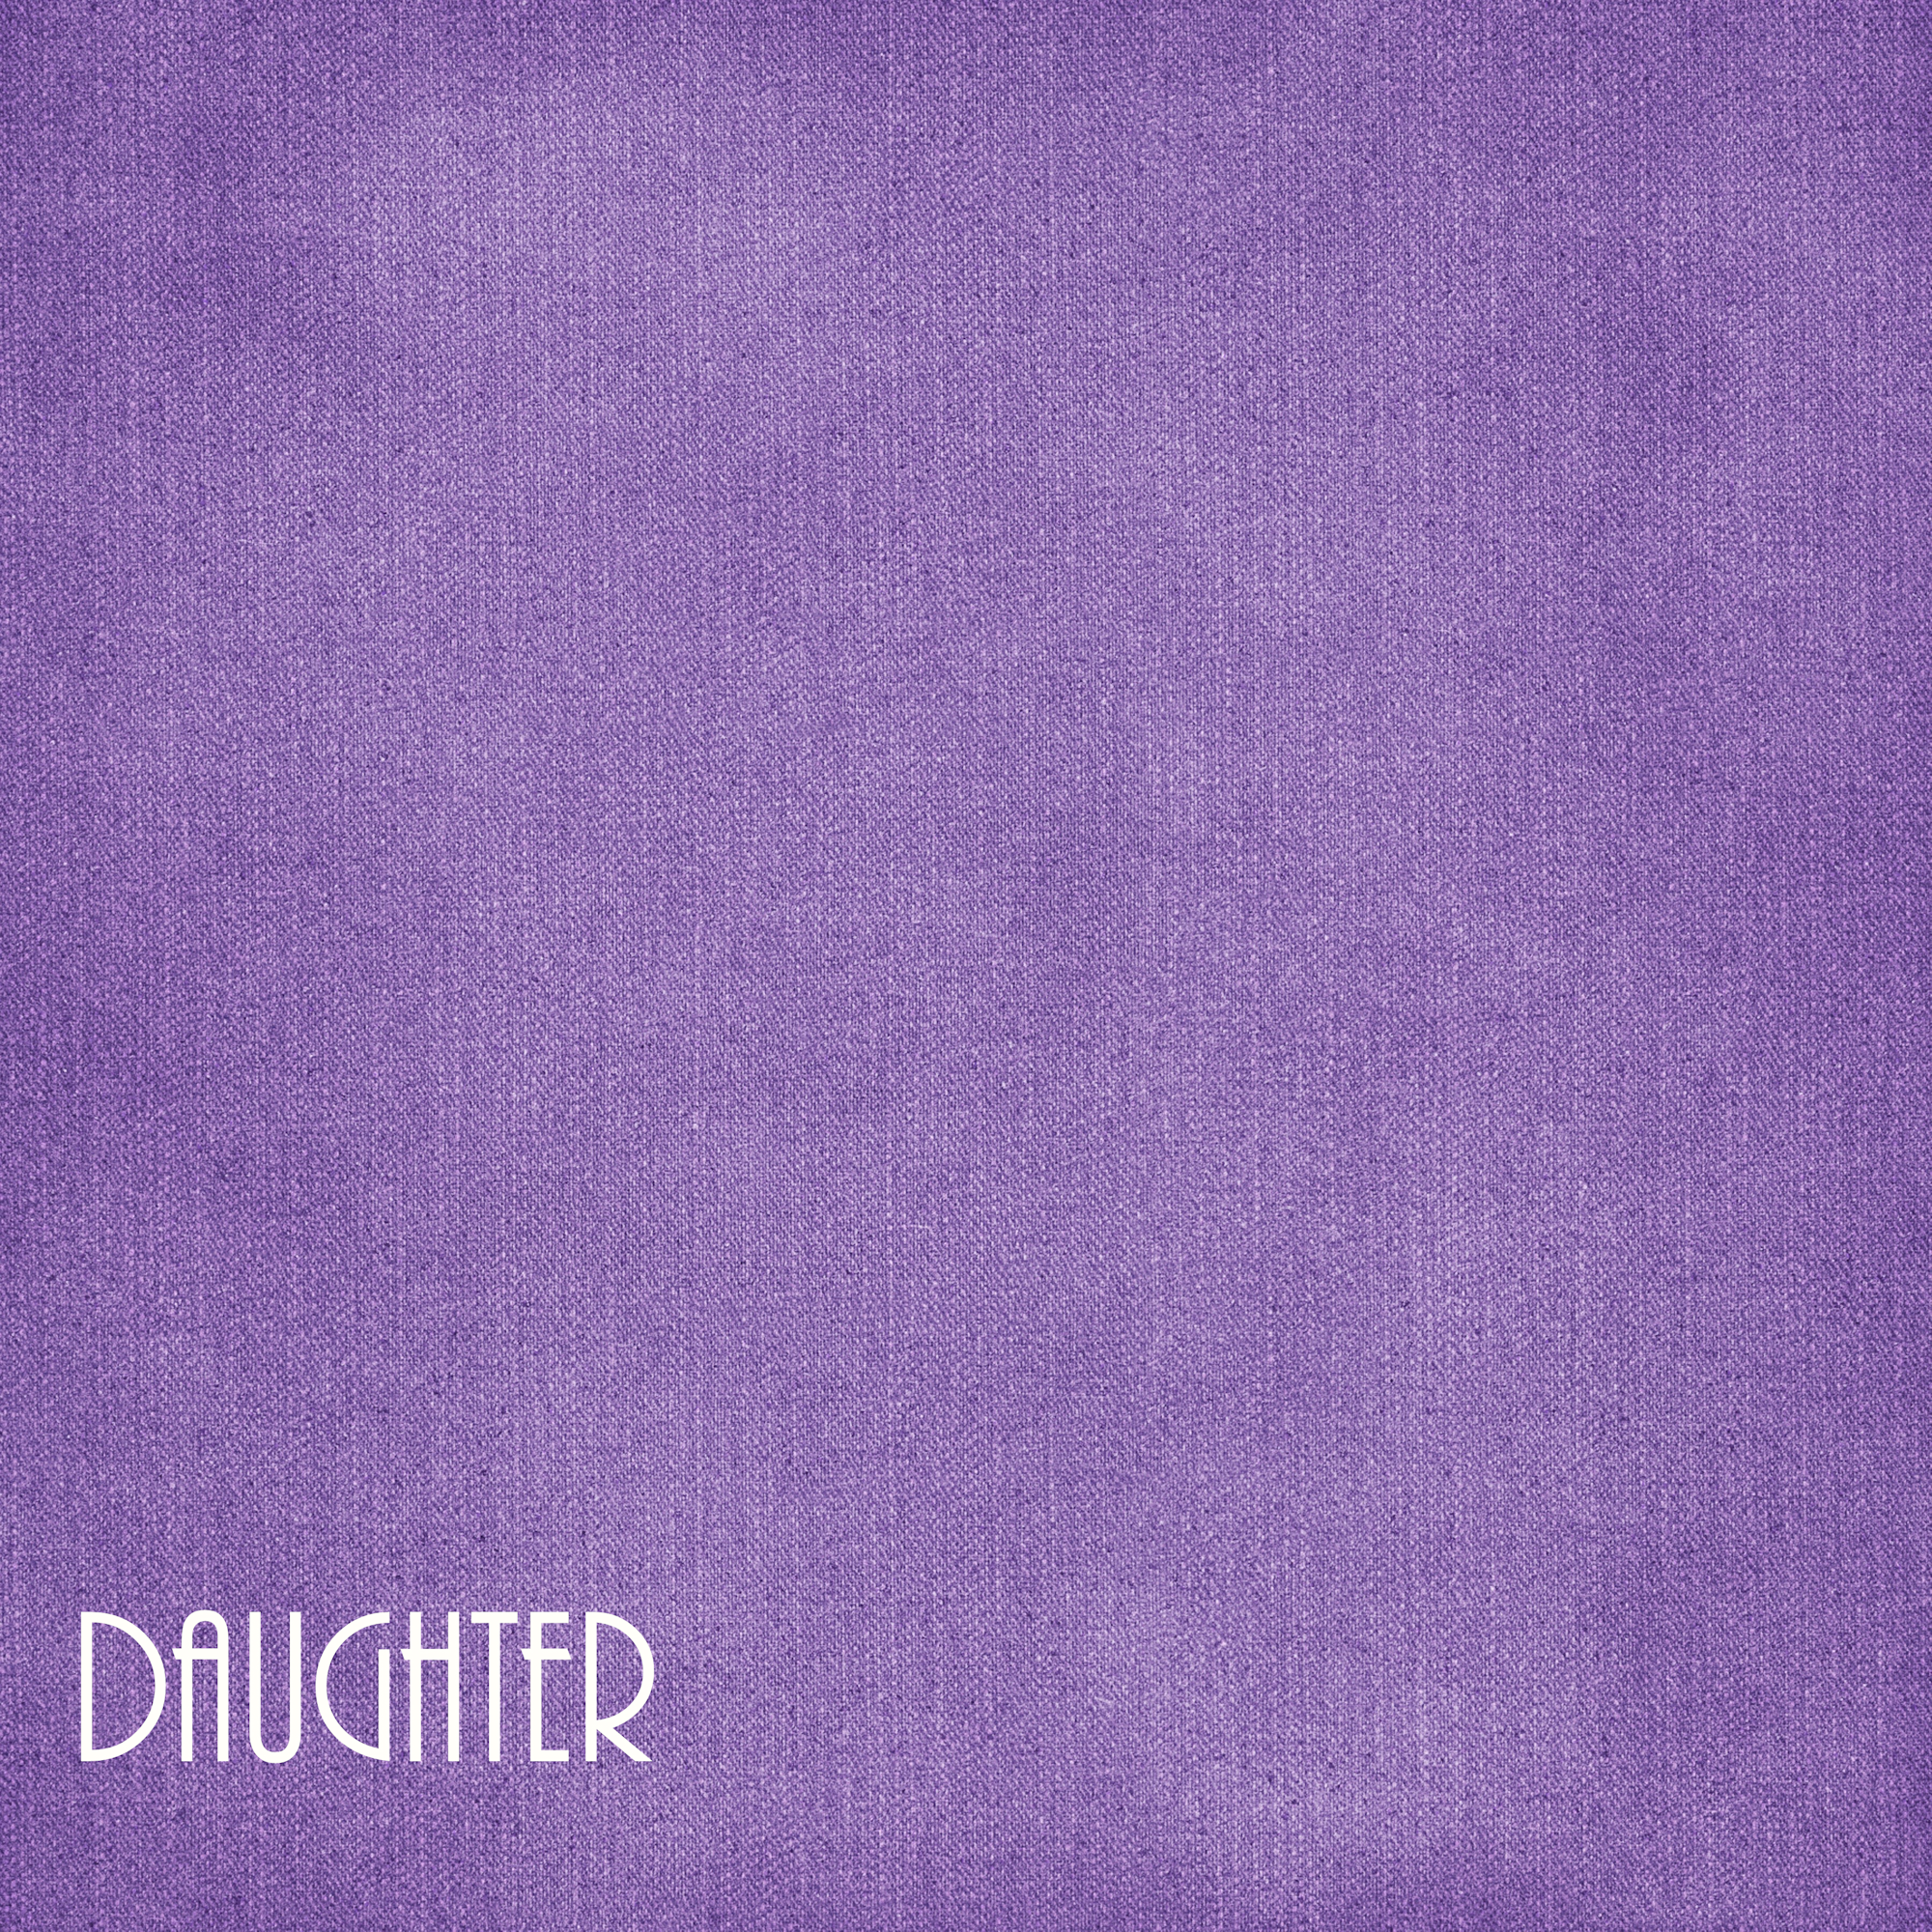 Family Collection Daughter 12 x 12 Double-Sided Scrapbook Paper by SSC Designs